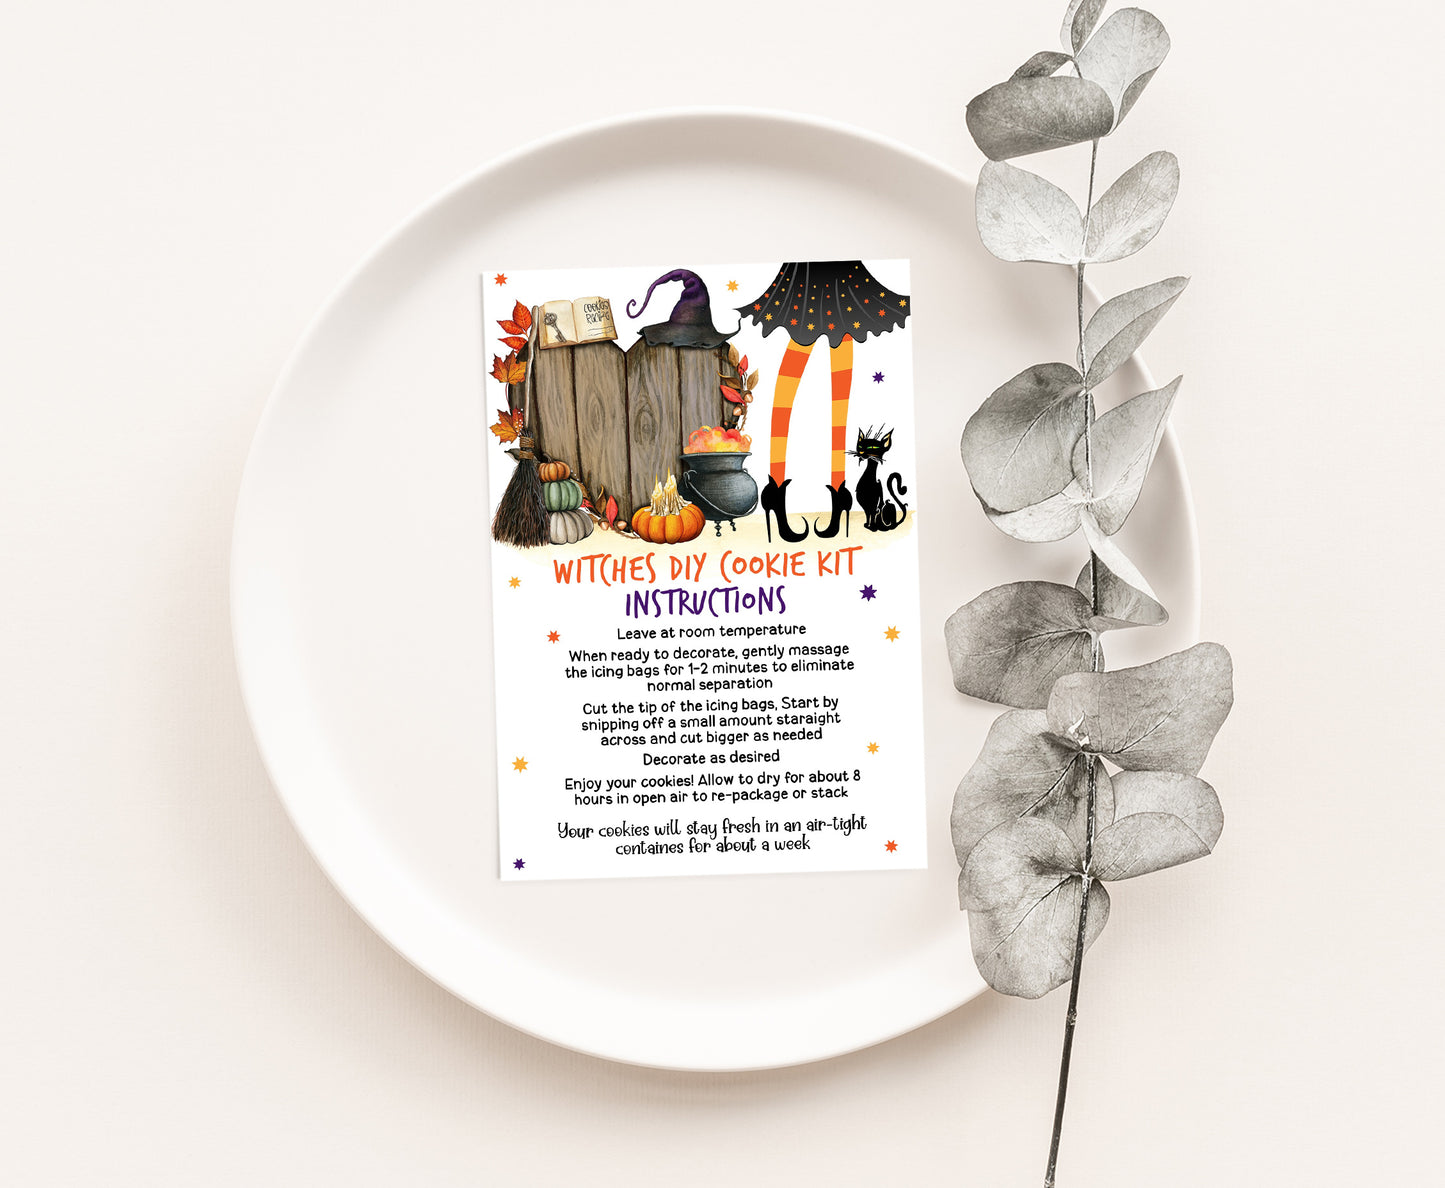 Witches Diy Cookie Kit Instructions Card | Halloween Printable Cards - 115